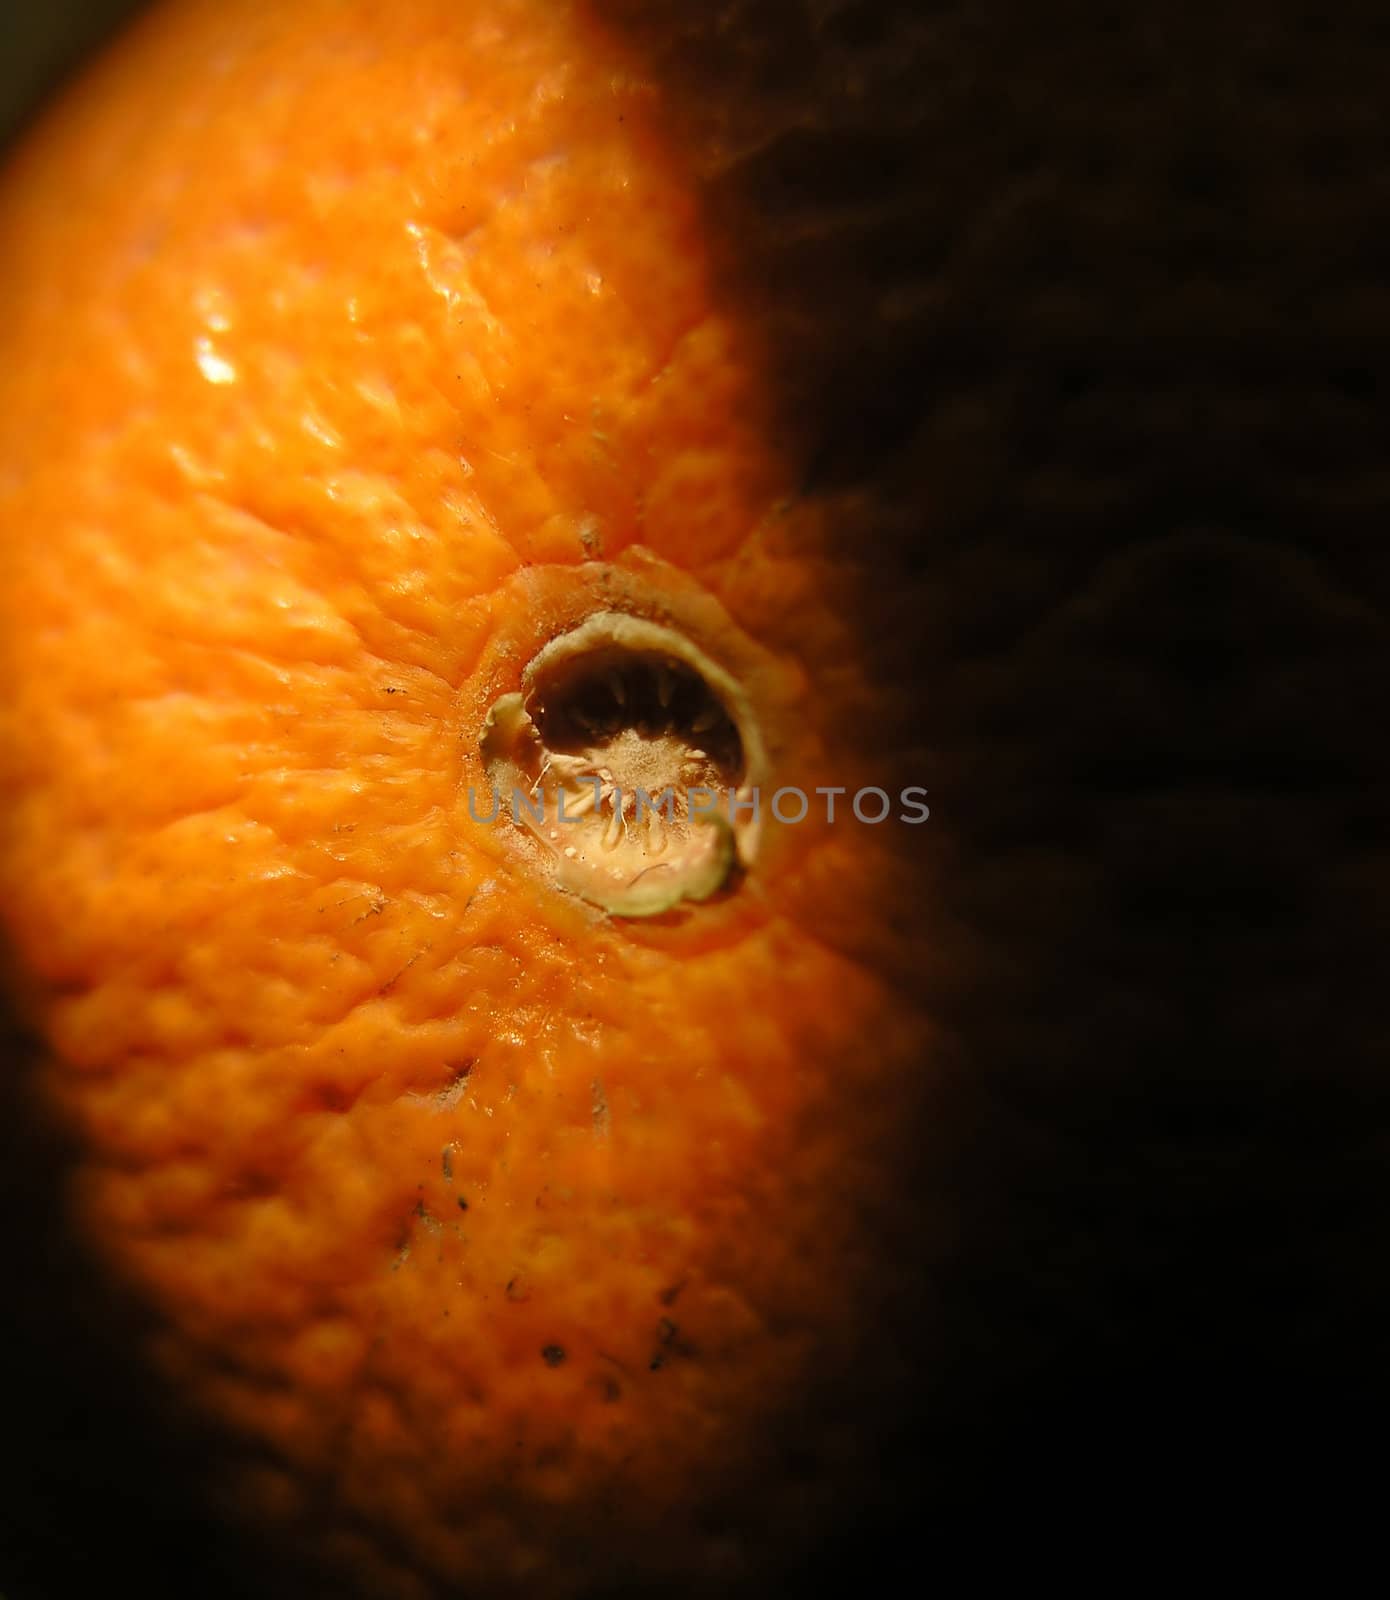 Low-key close-up of an orange corrugated rind coming out of darkness